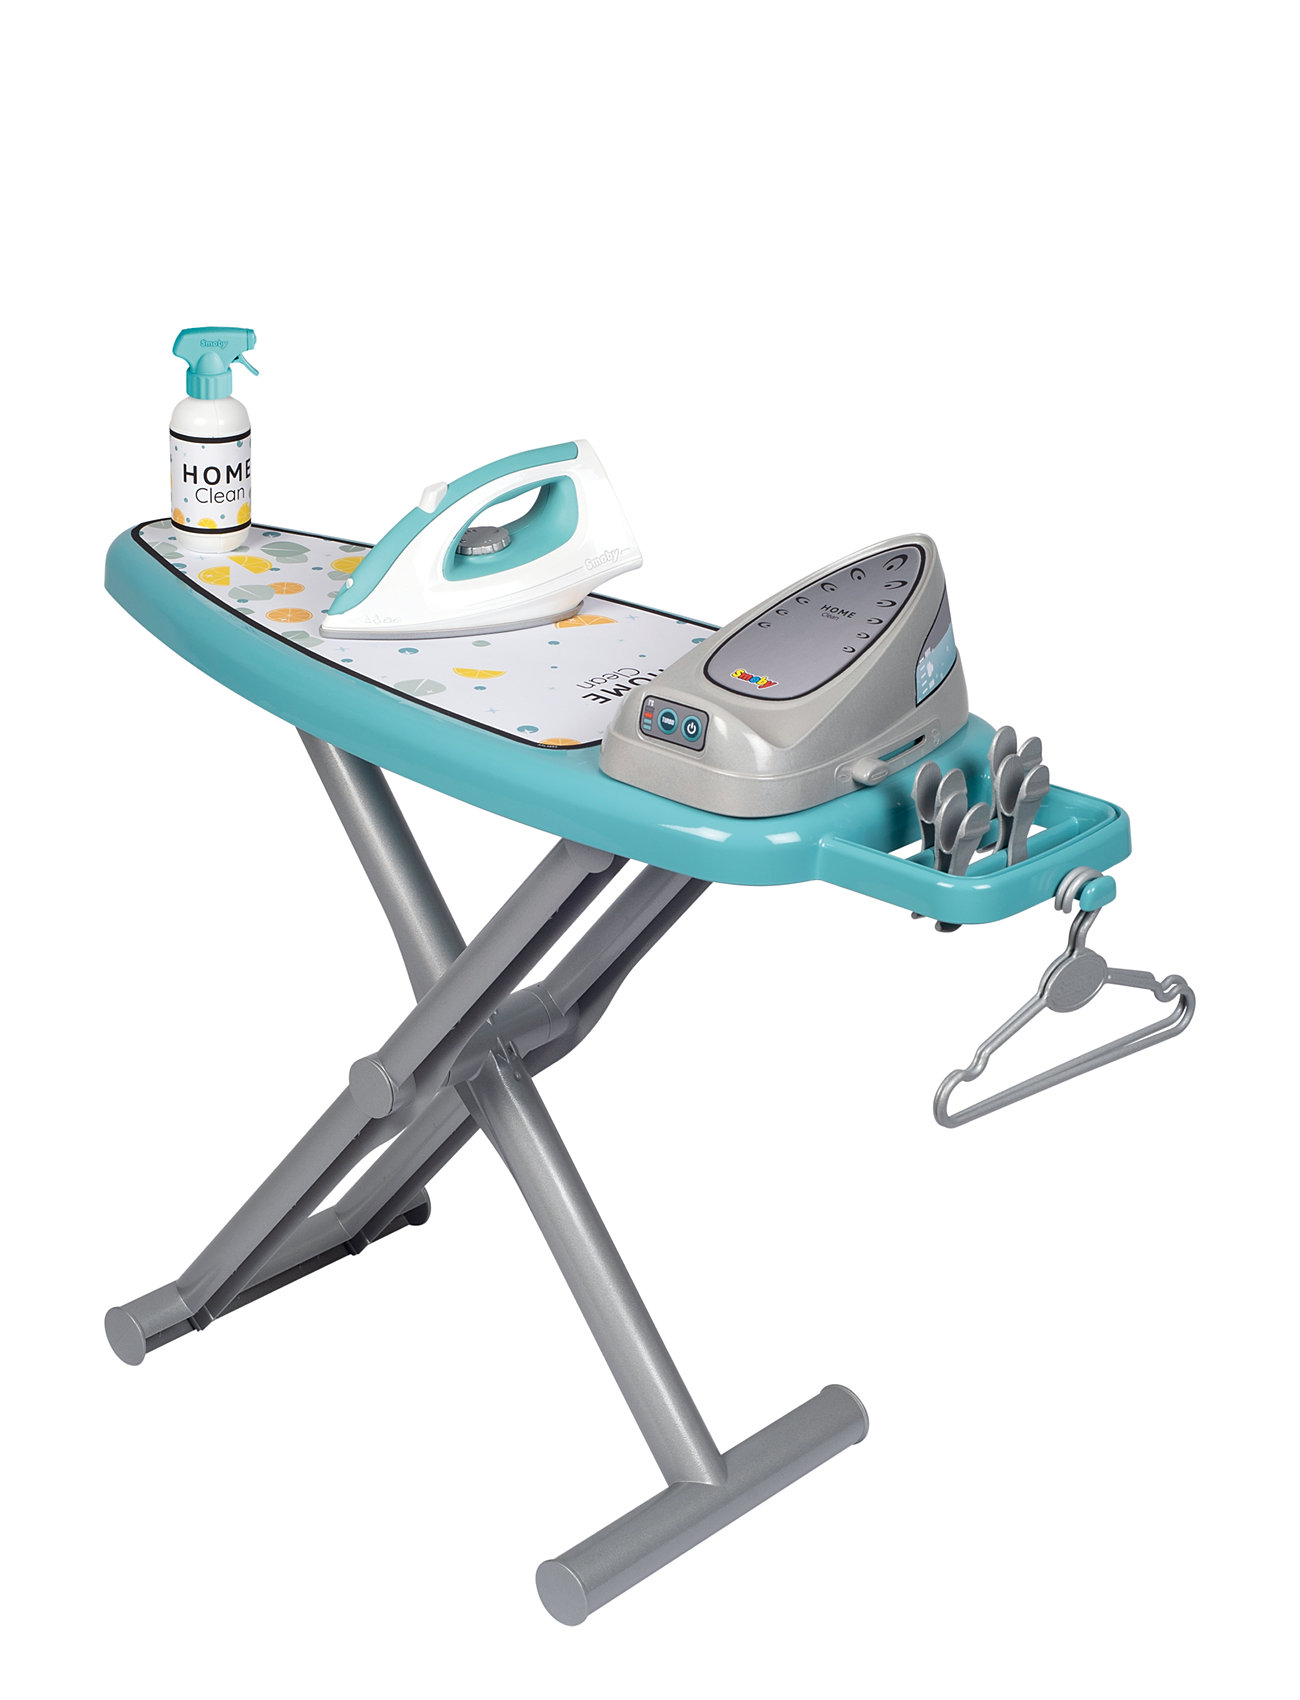 Smoby "Ironing Board + Steam Iron Toys Role Play Cleaning Blue Smoby"